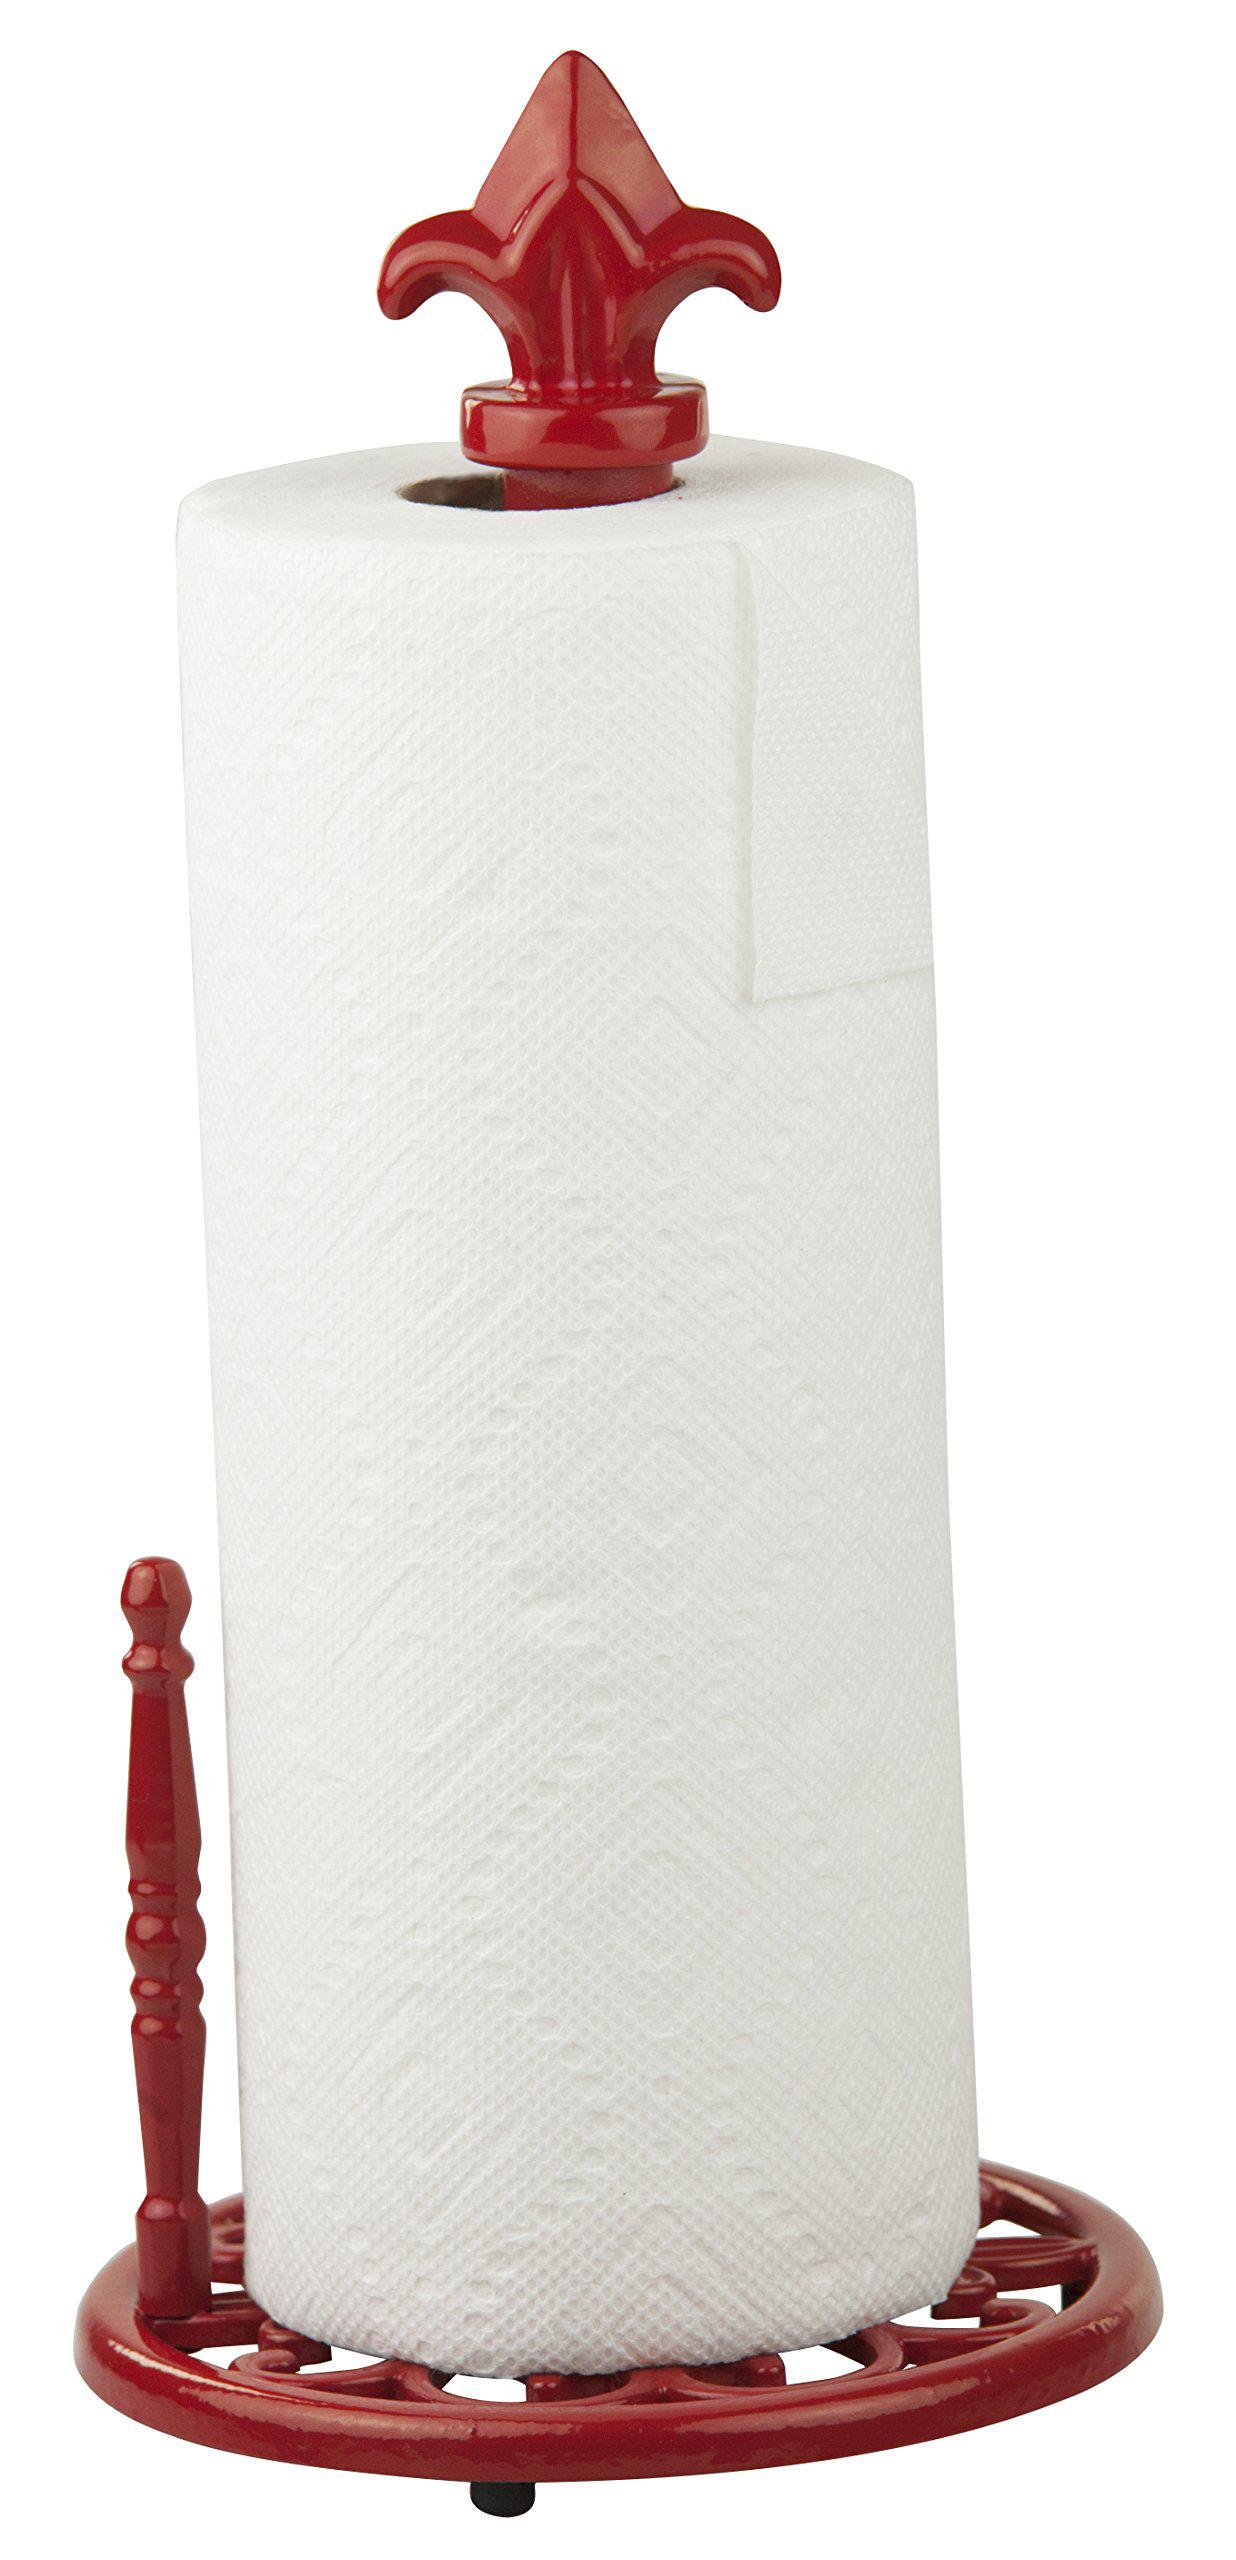 HOME BASICS fleur de lis countertop paper towel holder, cast iron, by home basics, (red) | contemporary paper towel holders | with non-sk